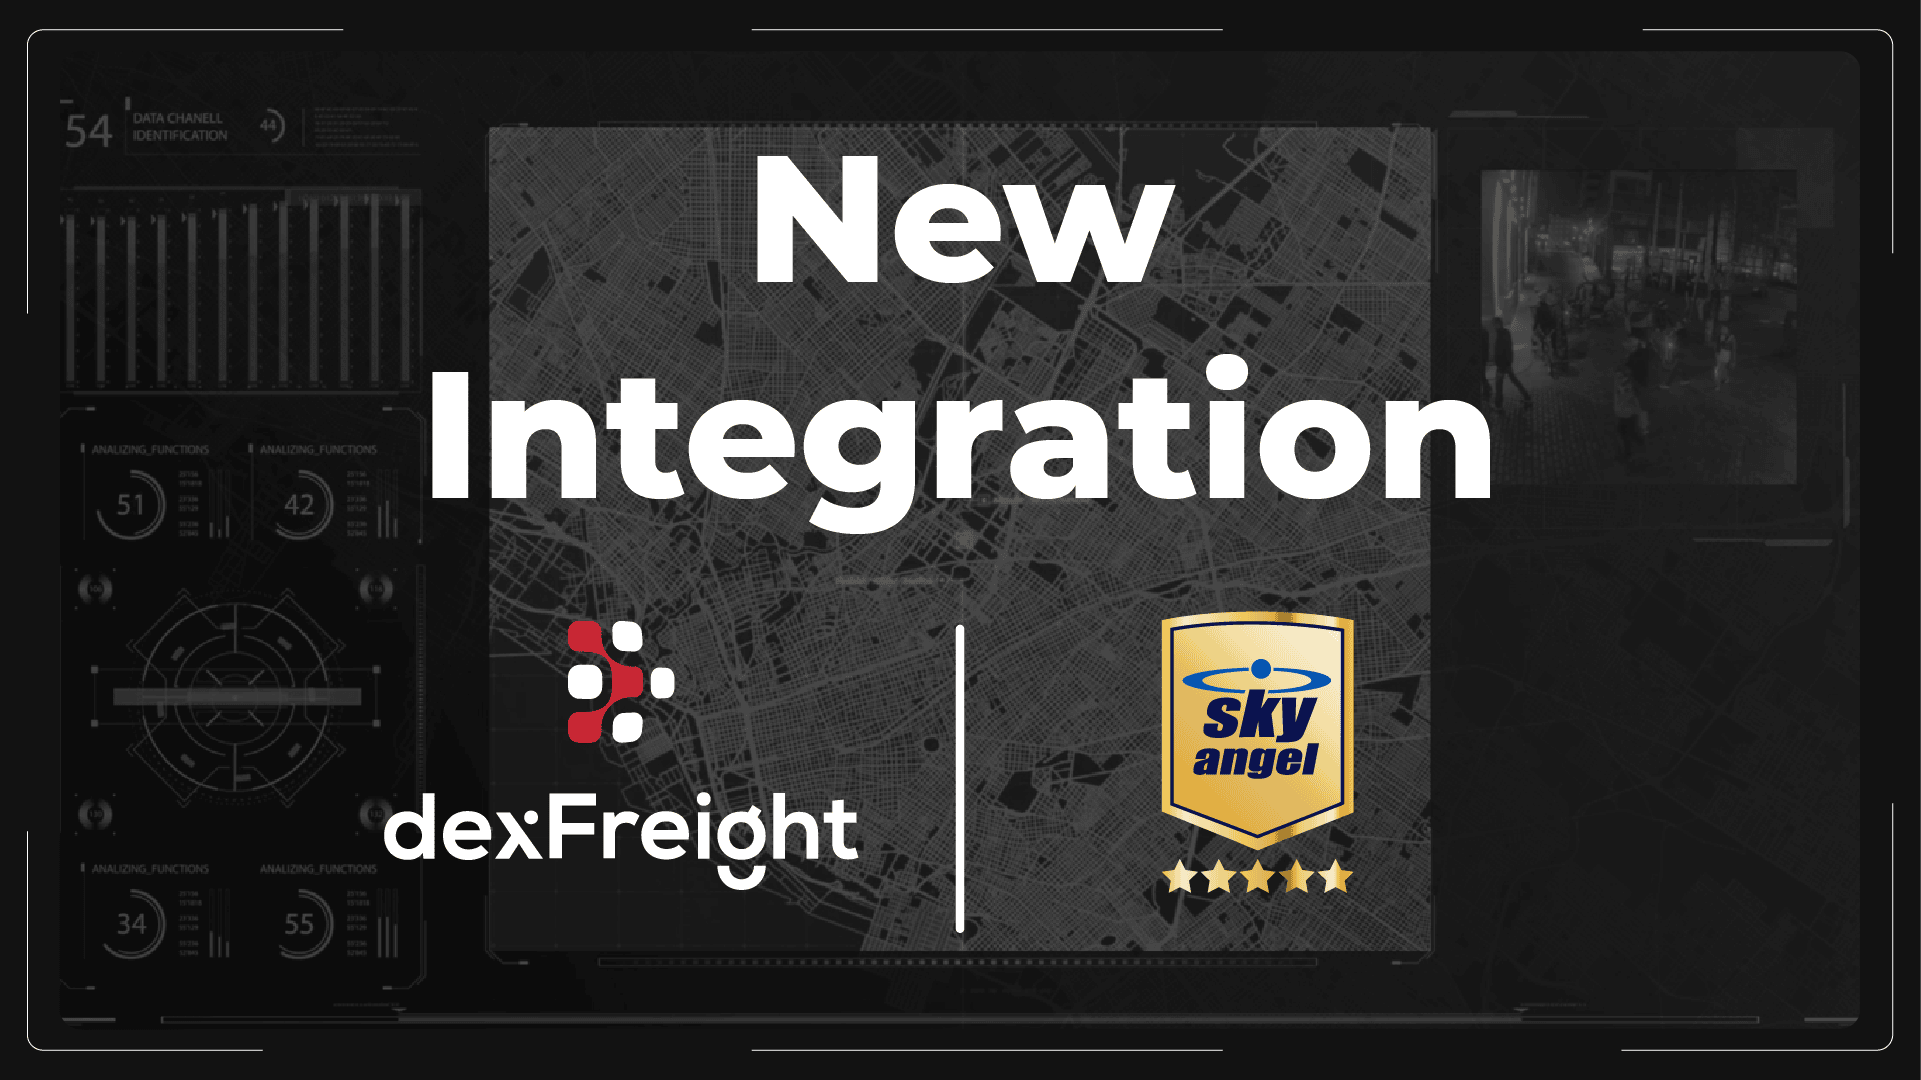 dexFreight Integrates with SkyAngel to Enhance Freight Monitoring